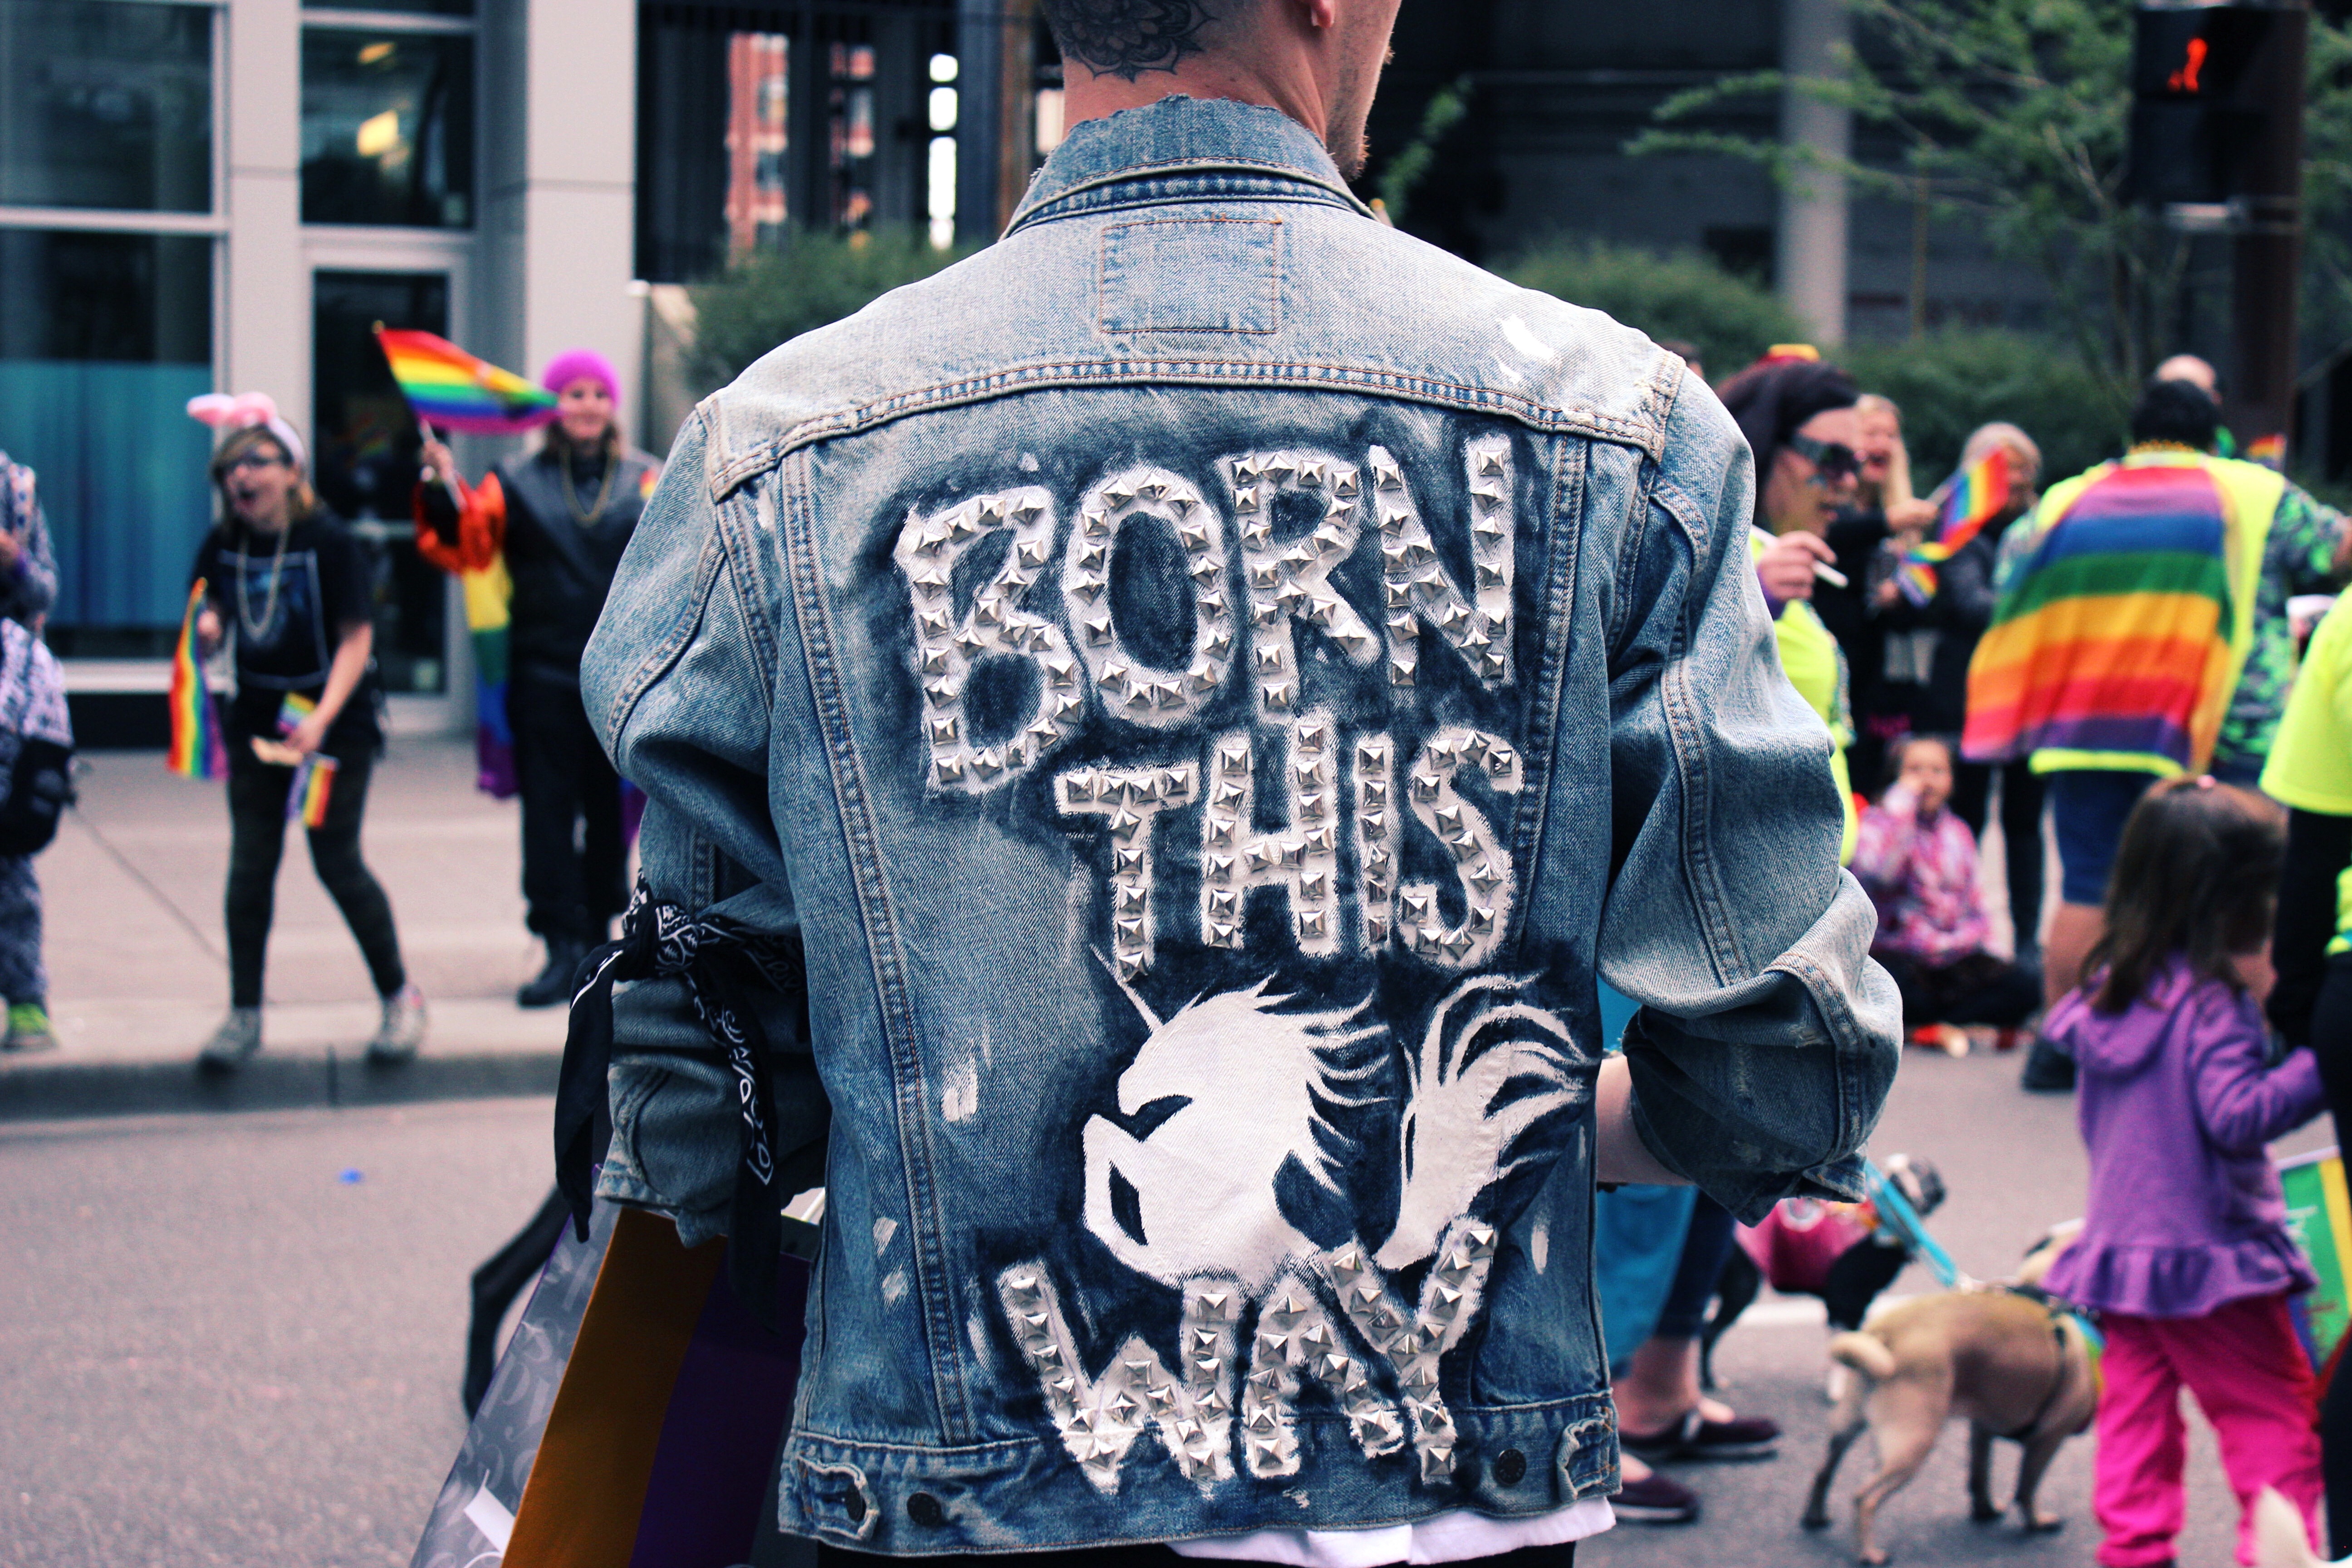 The back of a person's denim jacket says, 